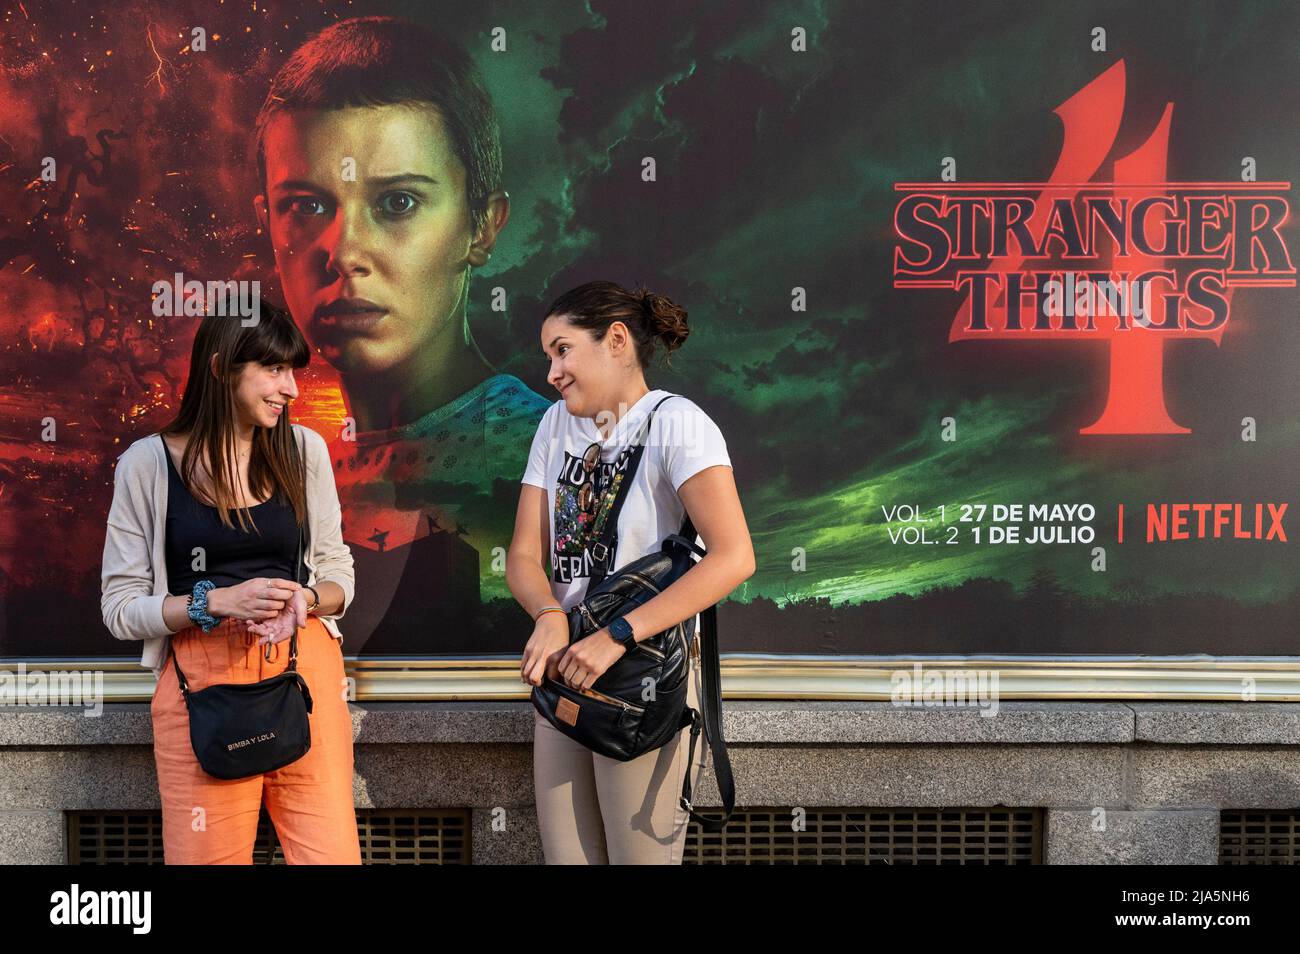 Women talk in front of a street commercial advertisement banner from the  American global on-demand Internet streaming media provider Netflix  featuring Stranger Things Season 4 TV show in Spain. (Photo by Xavi